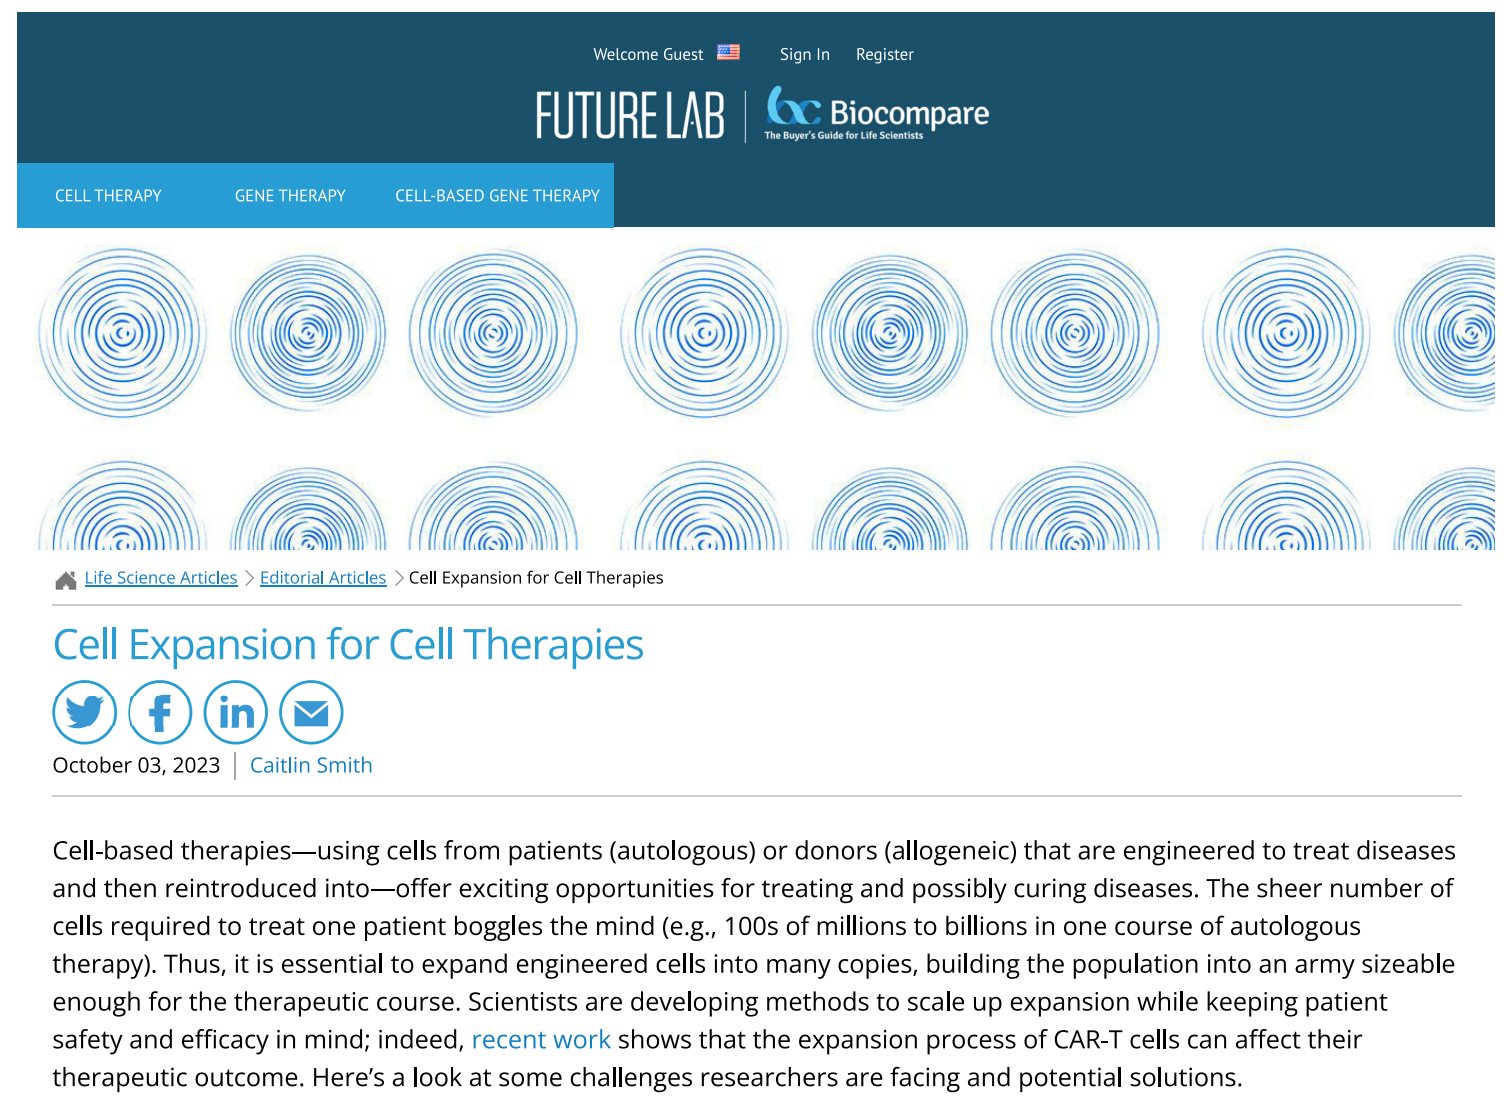 Cell Expansion for Cell Therapies